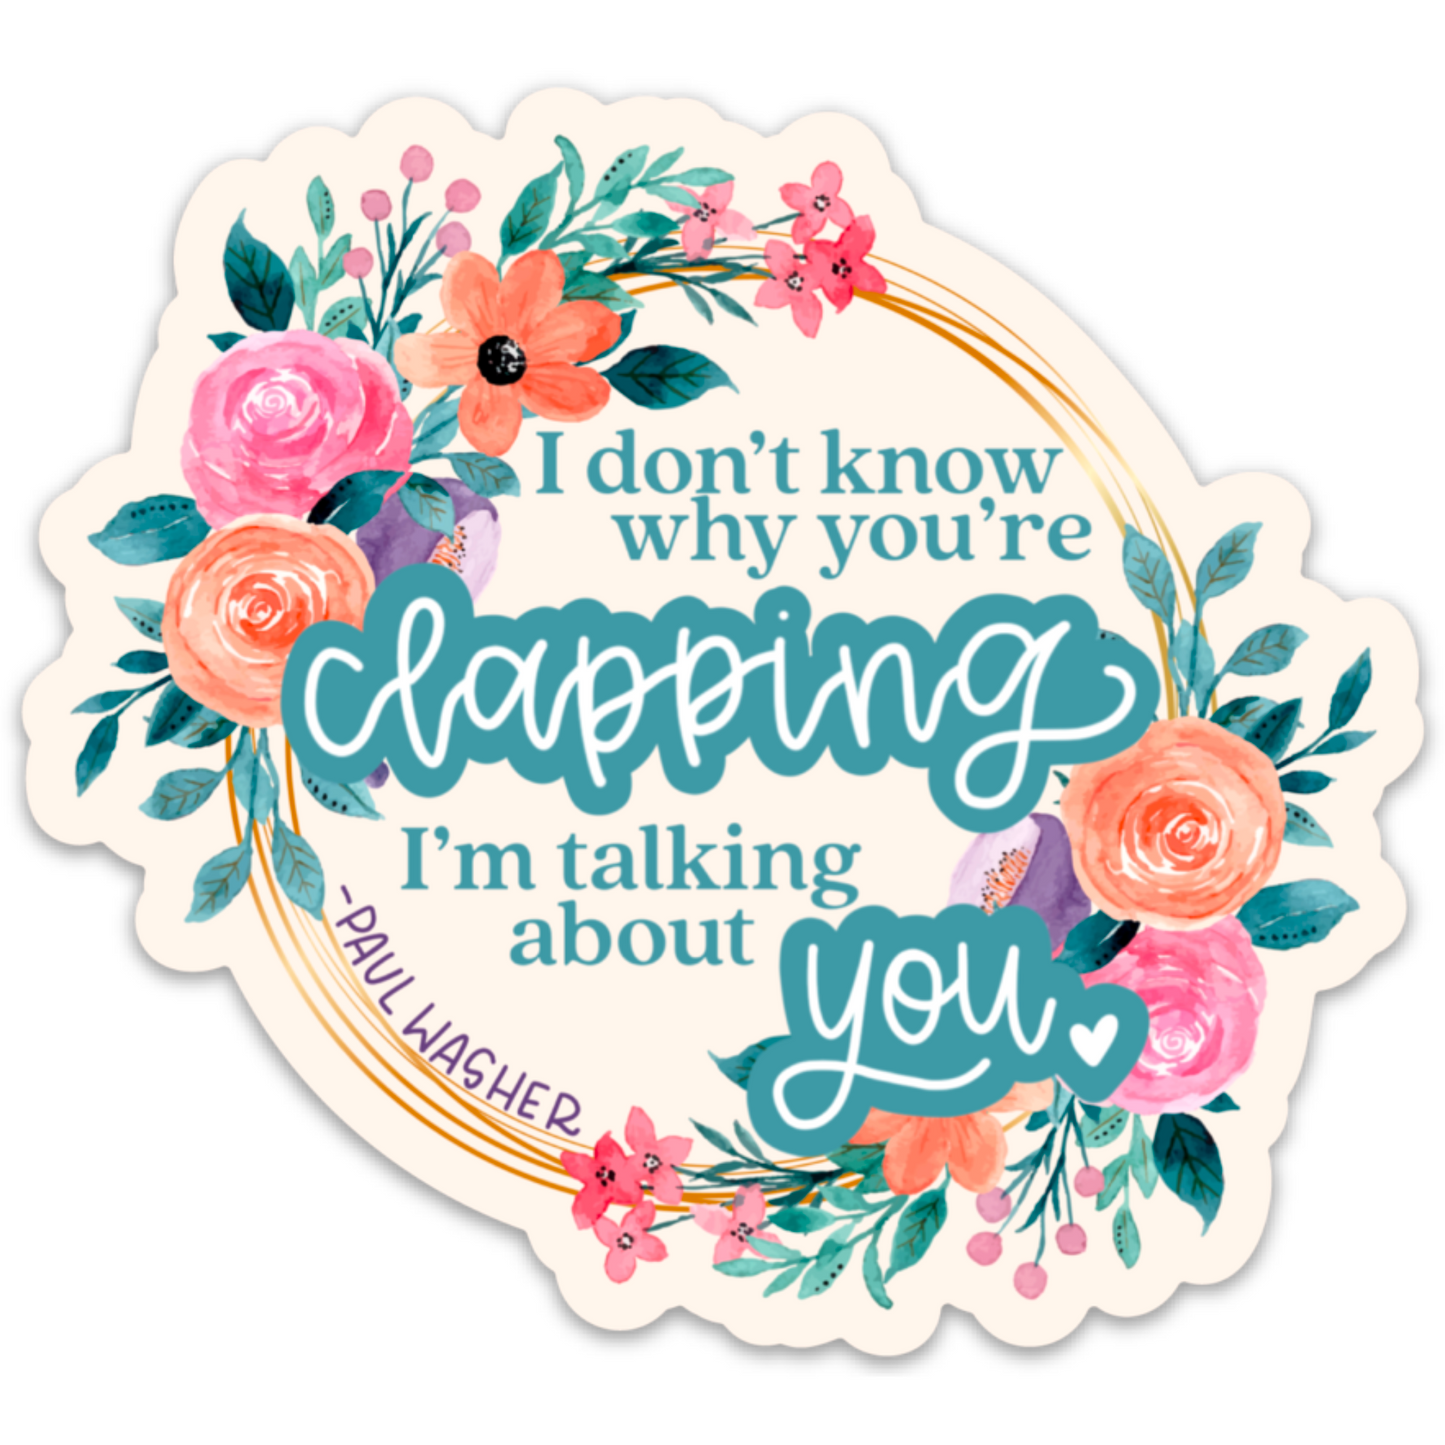 I don’t know why you’re clapping | Vinyl Sticker